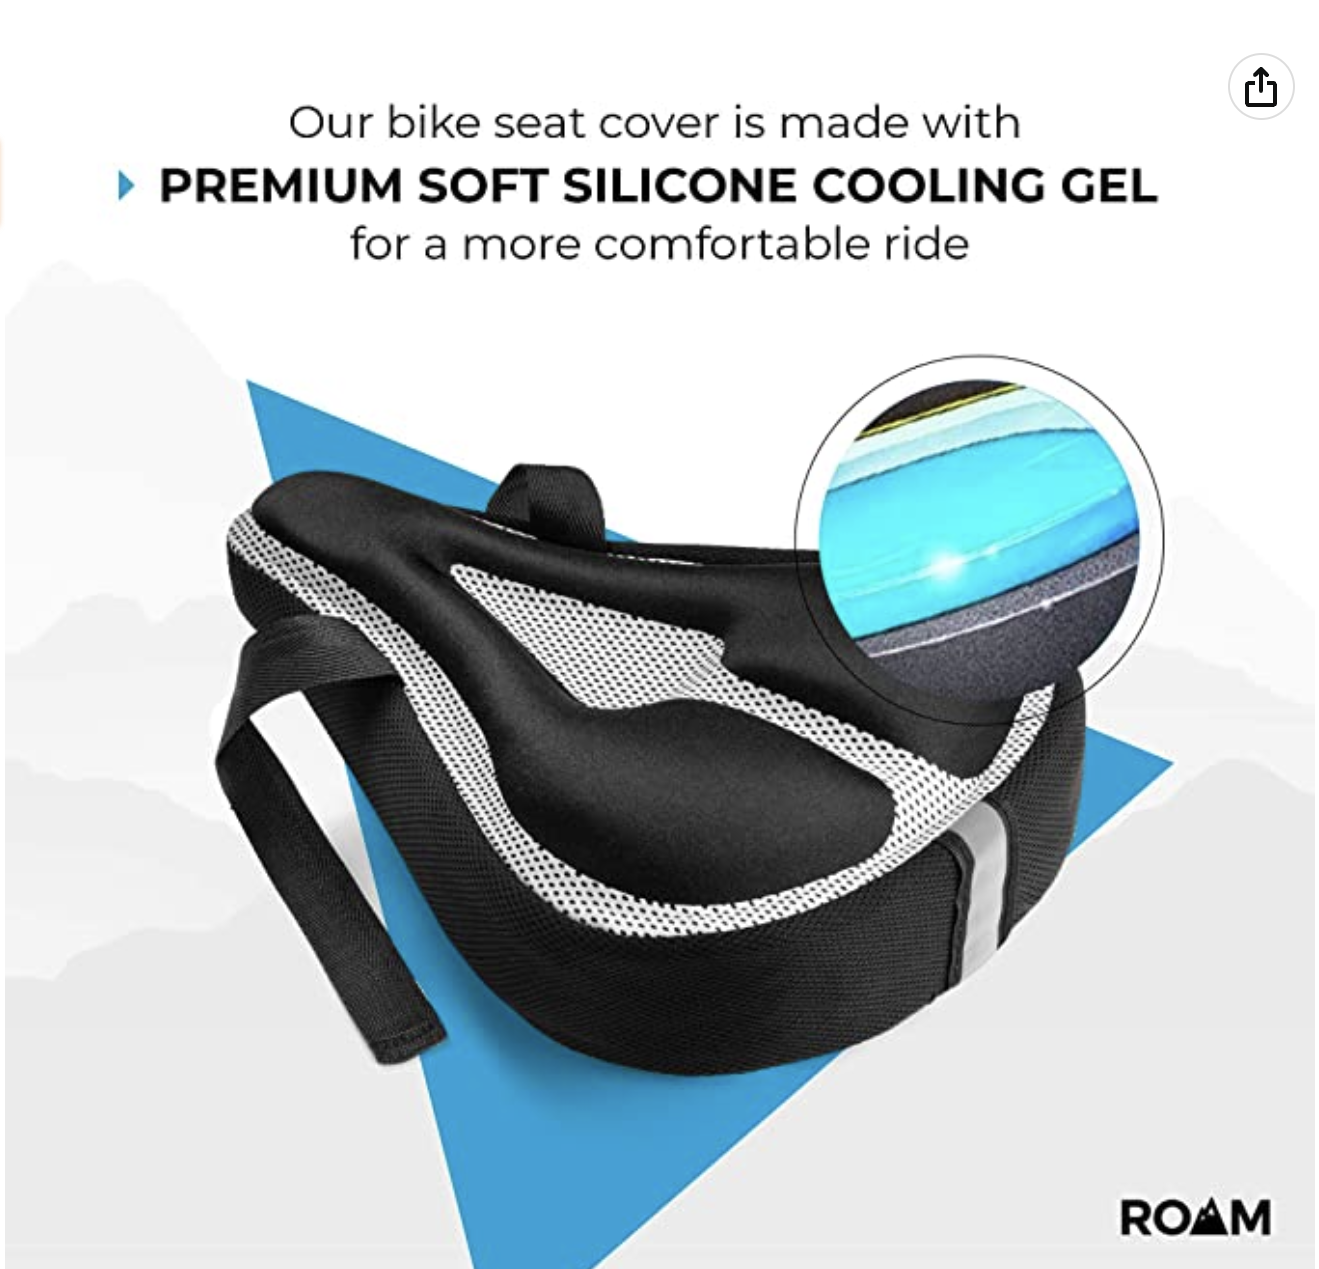 Adding an extra mountain bike saddle cushion increases your level of comfort.